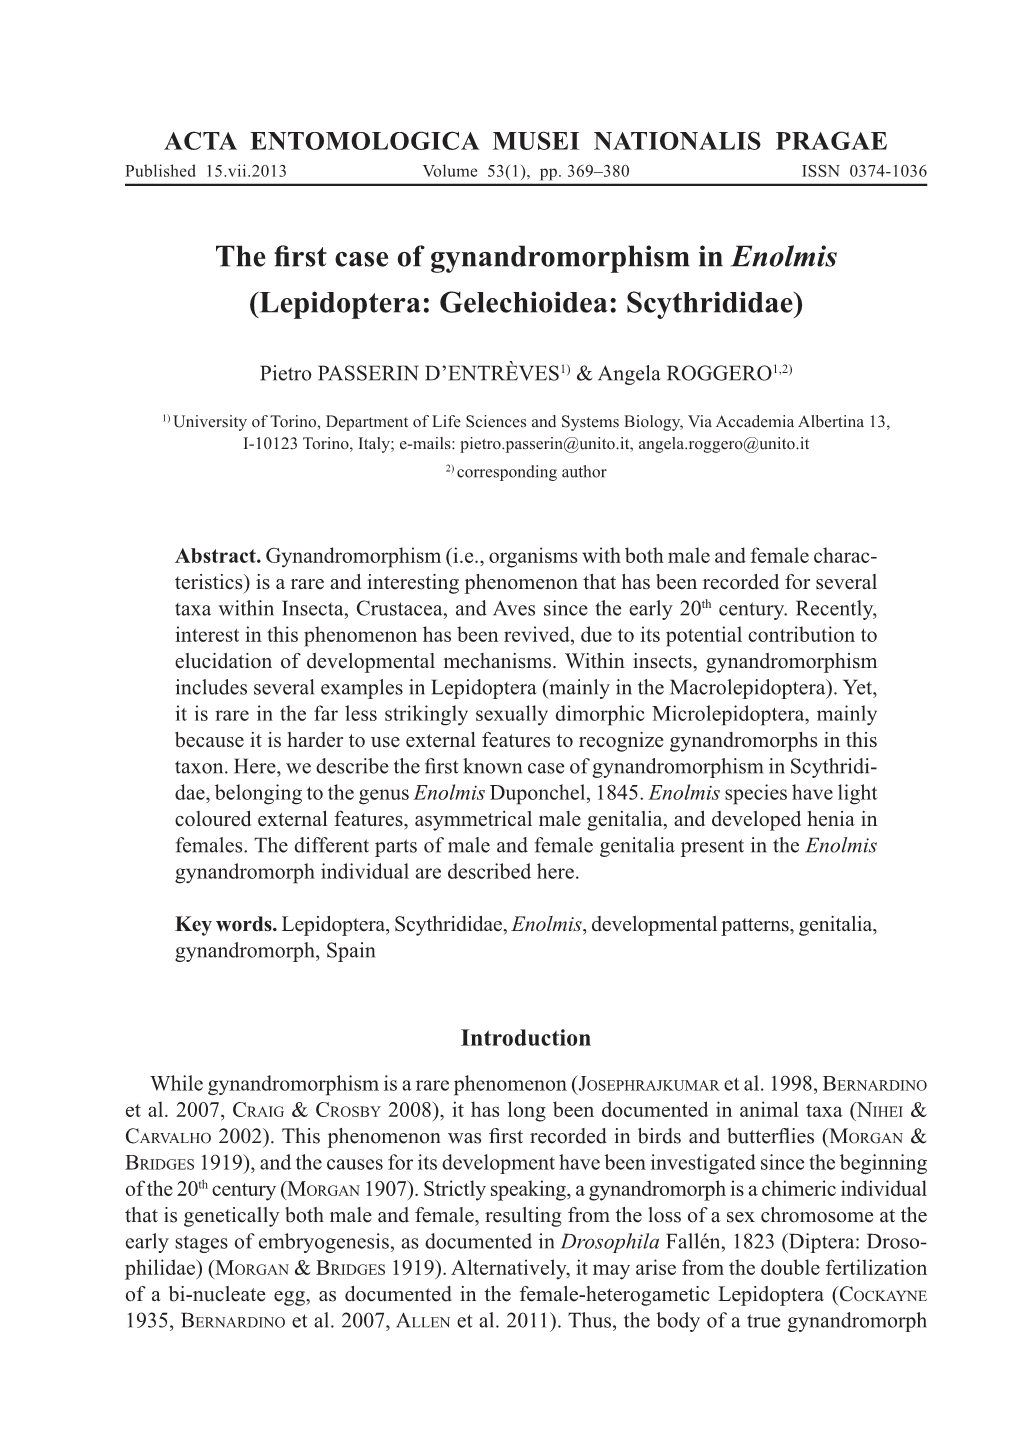 The First Case of Gynandromorphism in Enolmis